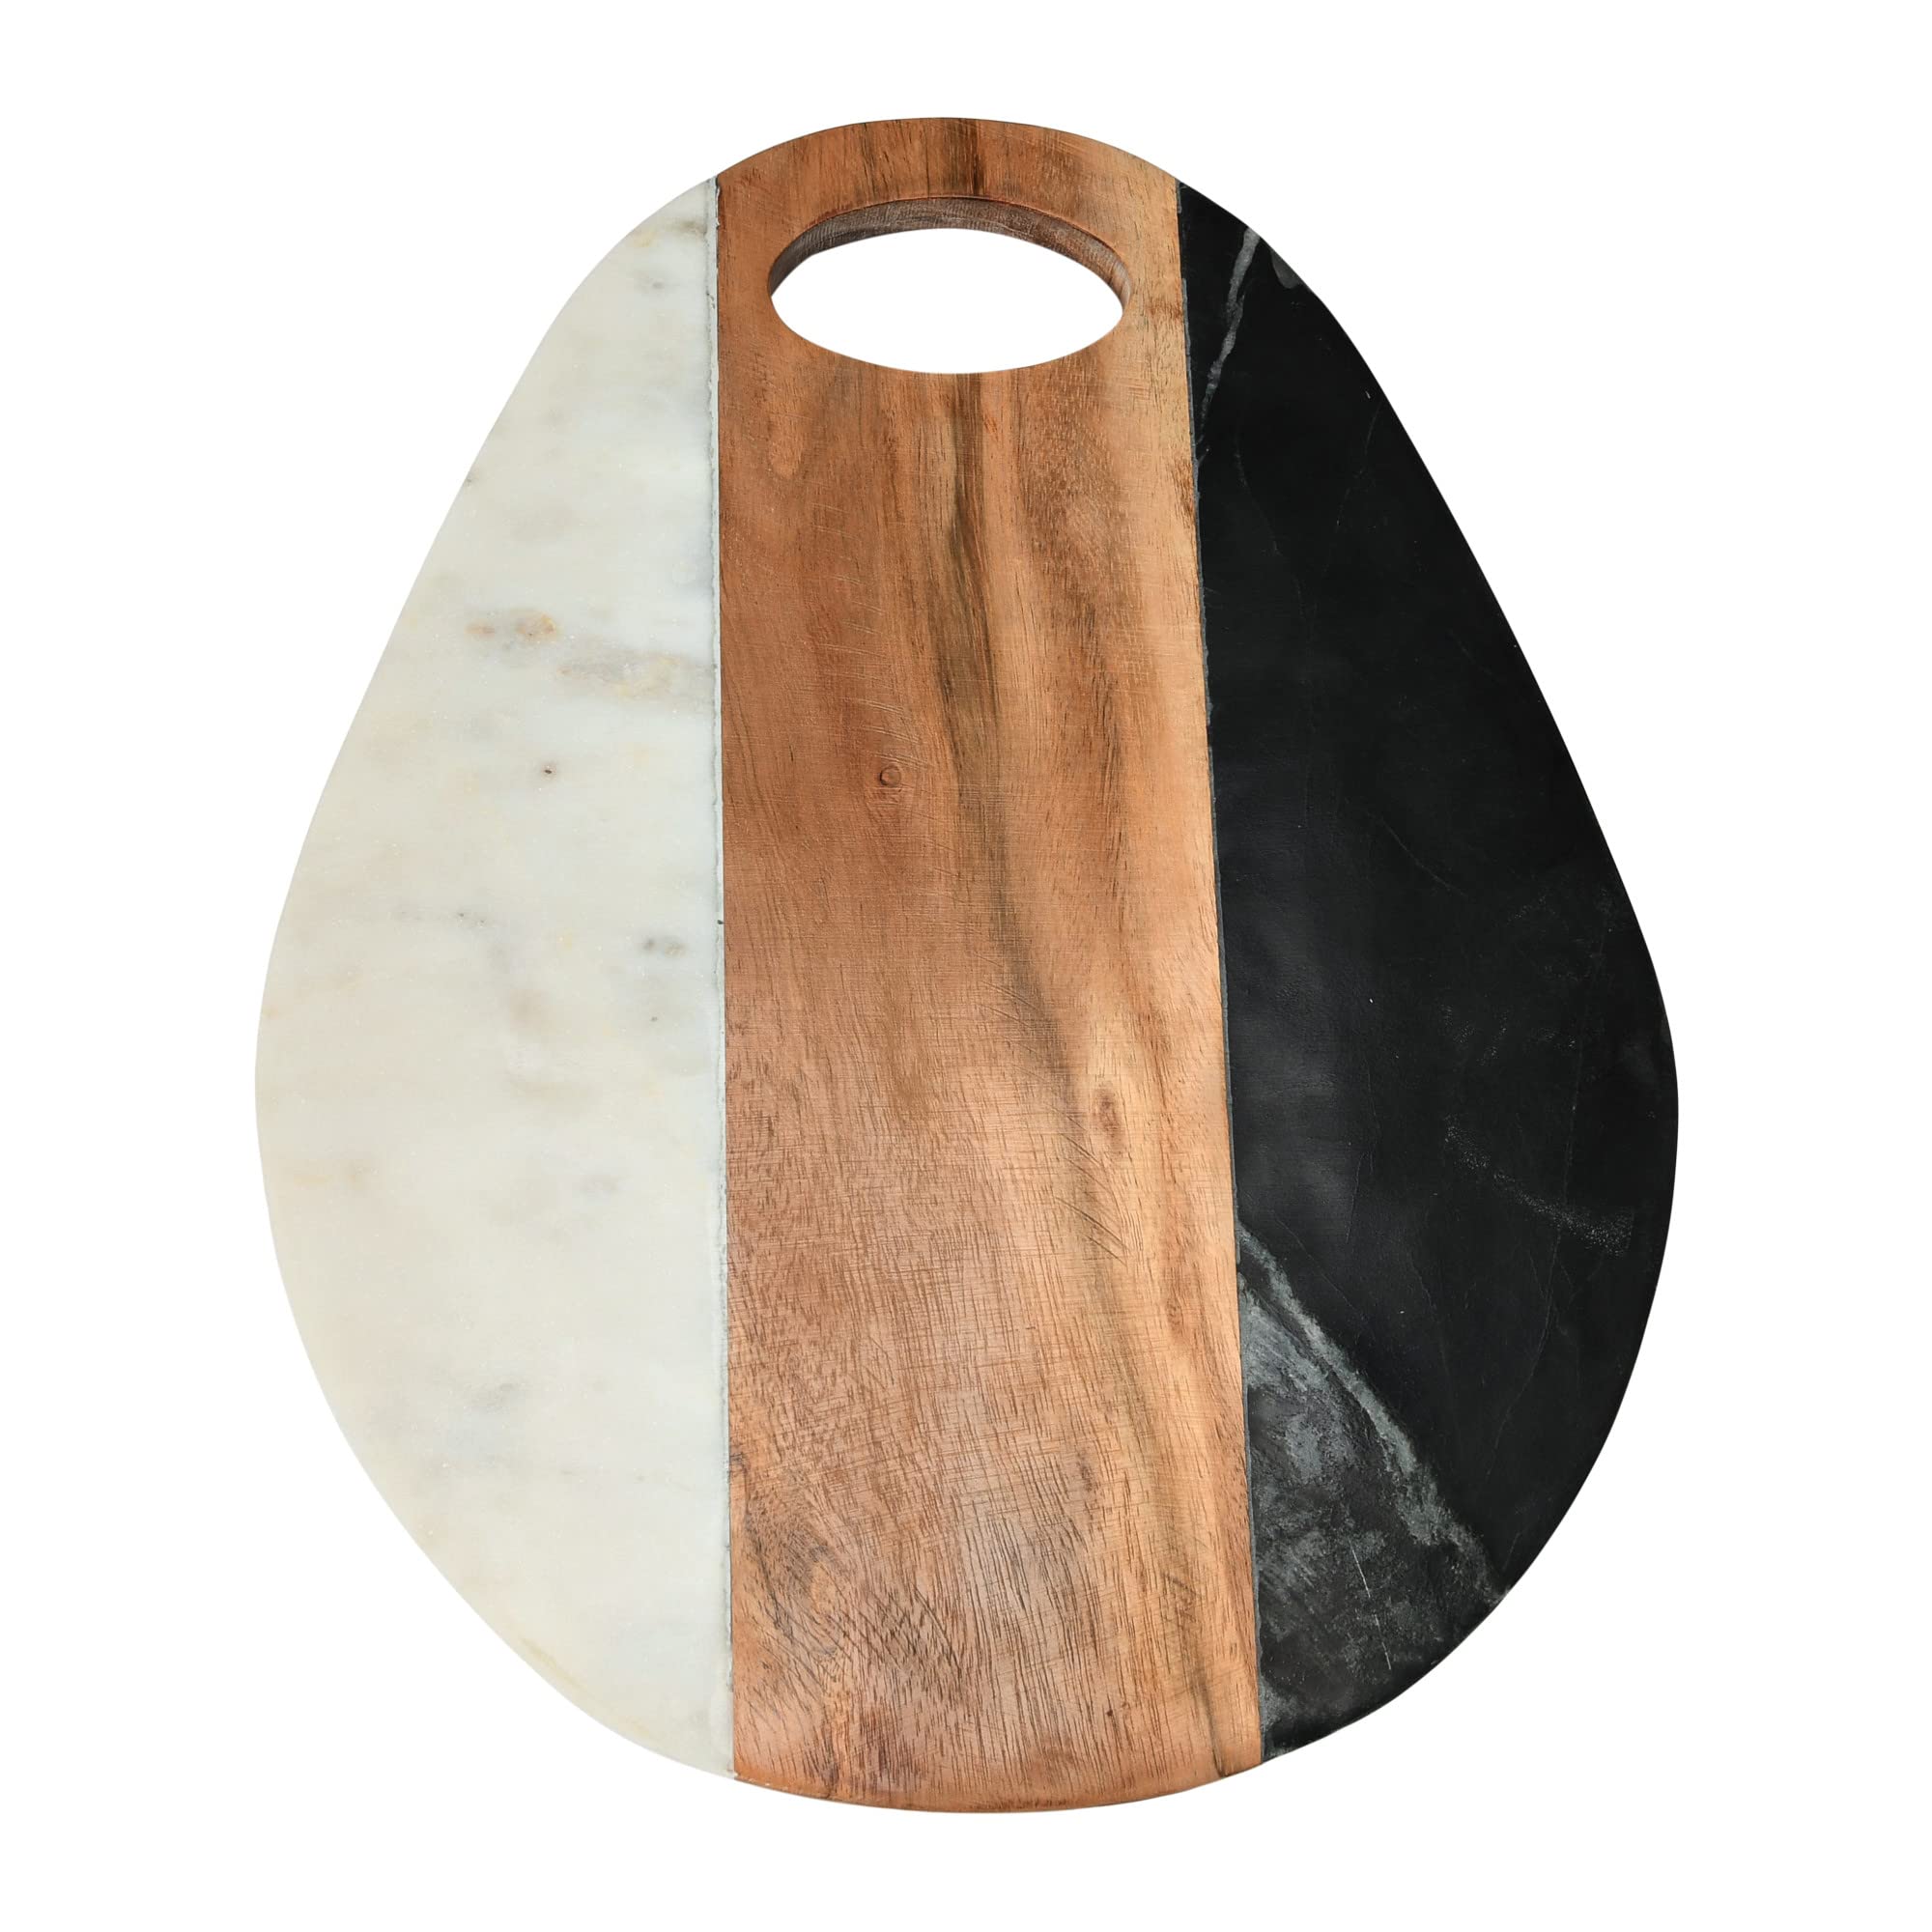 Bloomingville Marble and Acacia Wood Cutting Board with Handle, Multicolor Serving Pieces, 15